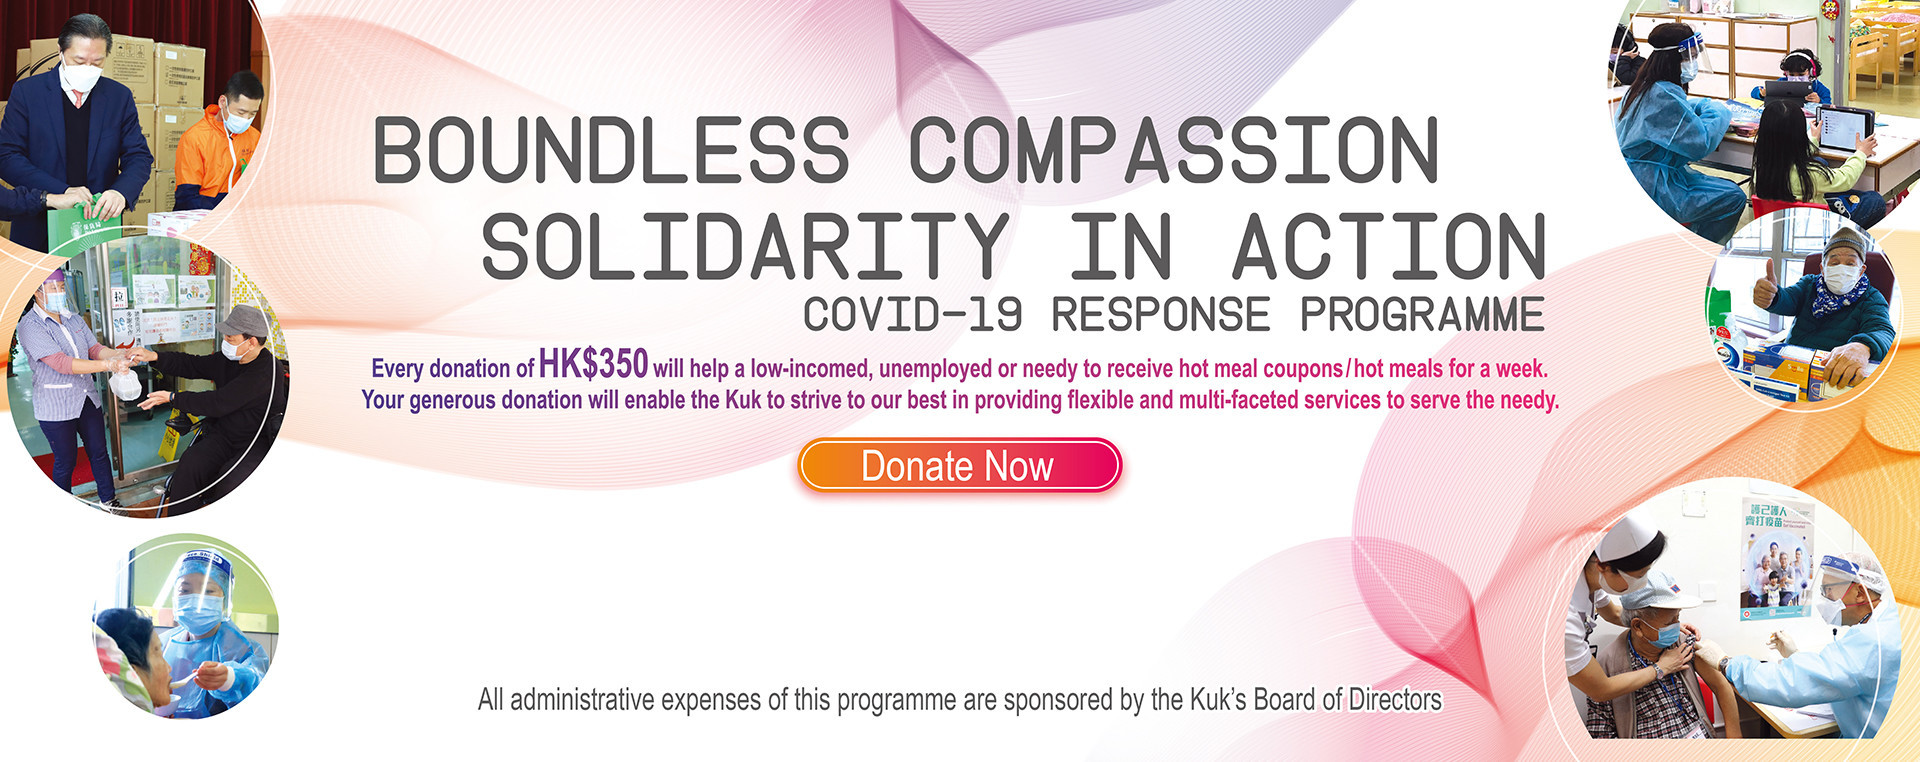  “Boundless Compassion．Solidarity in Action” COVID-19 Response Programme